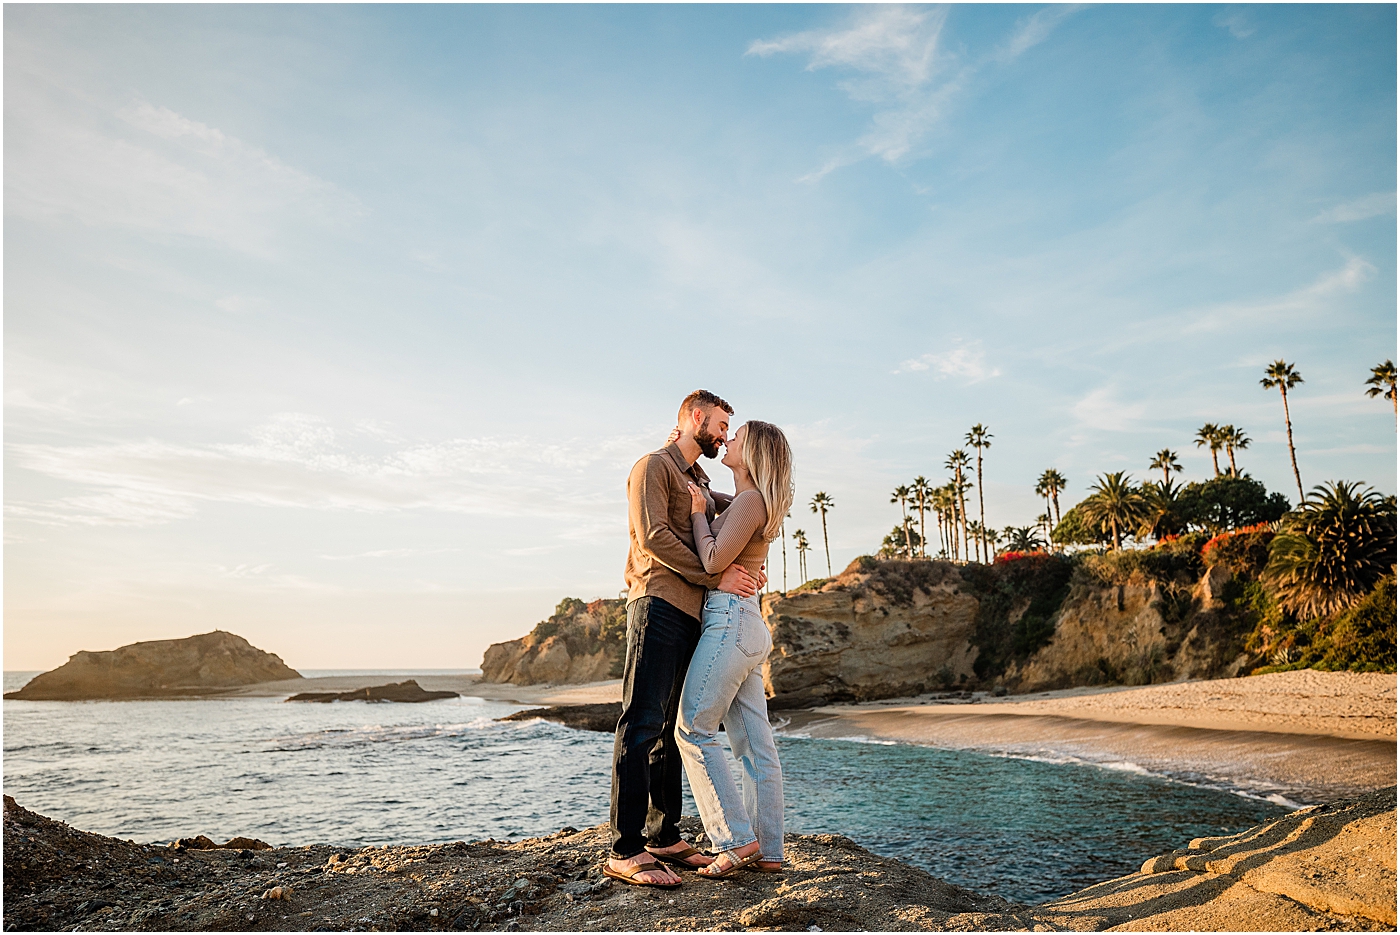 Laguna beach couples photography at Treasure Island Park. Couple standing on rocks in front of the ocean.